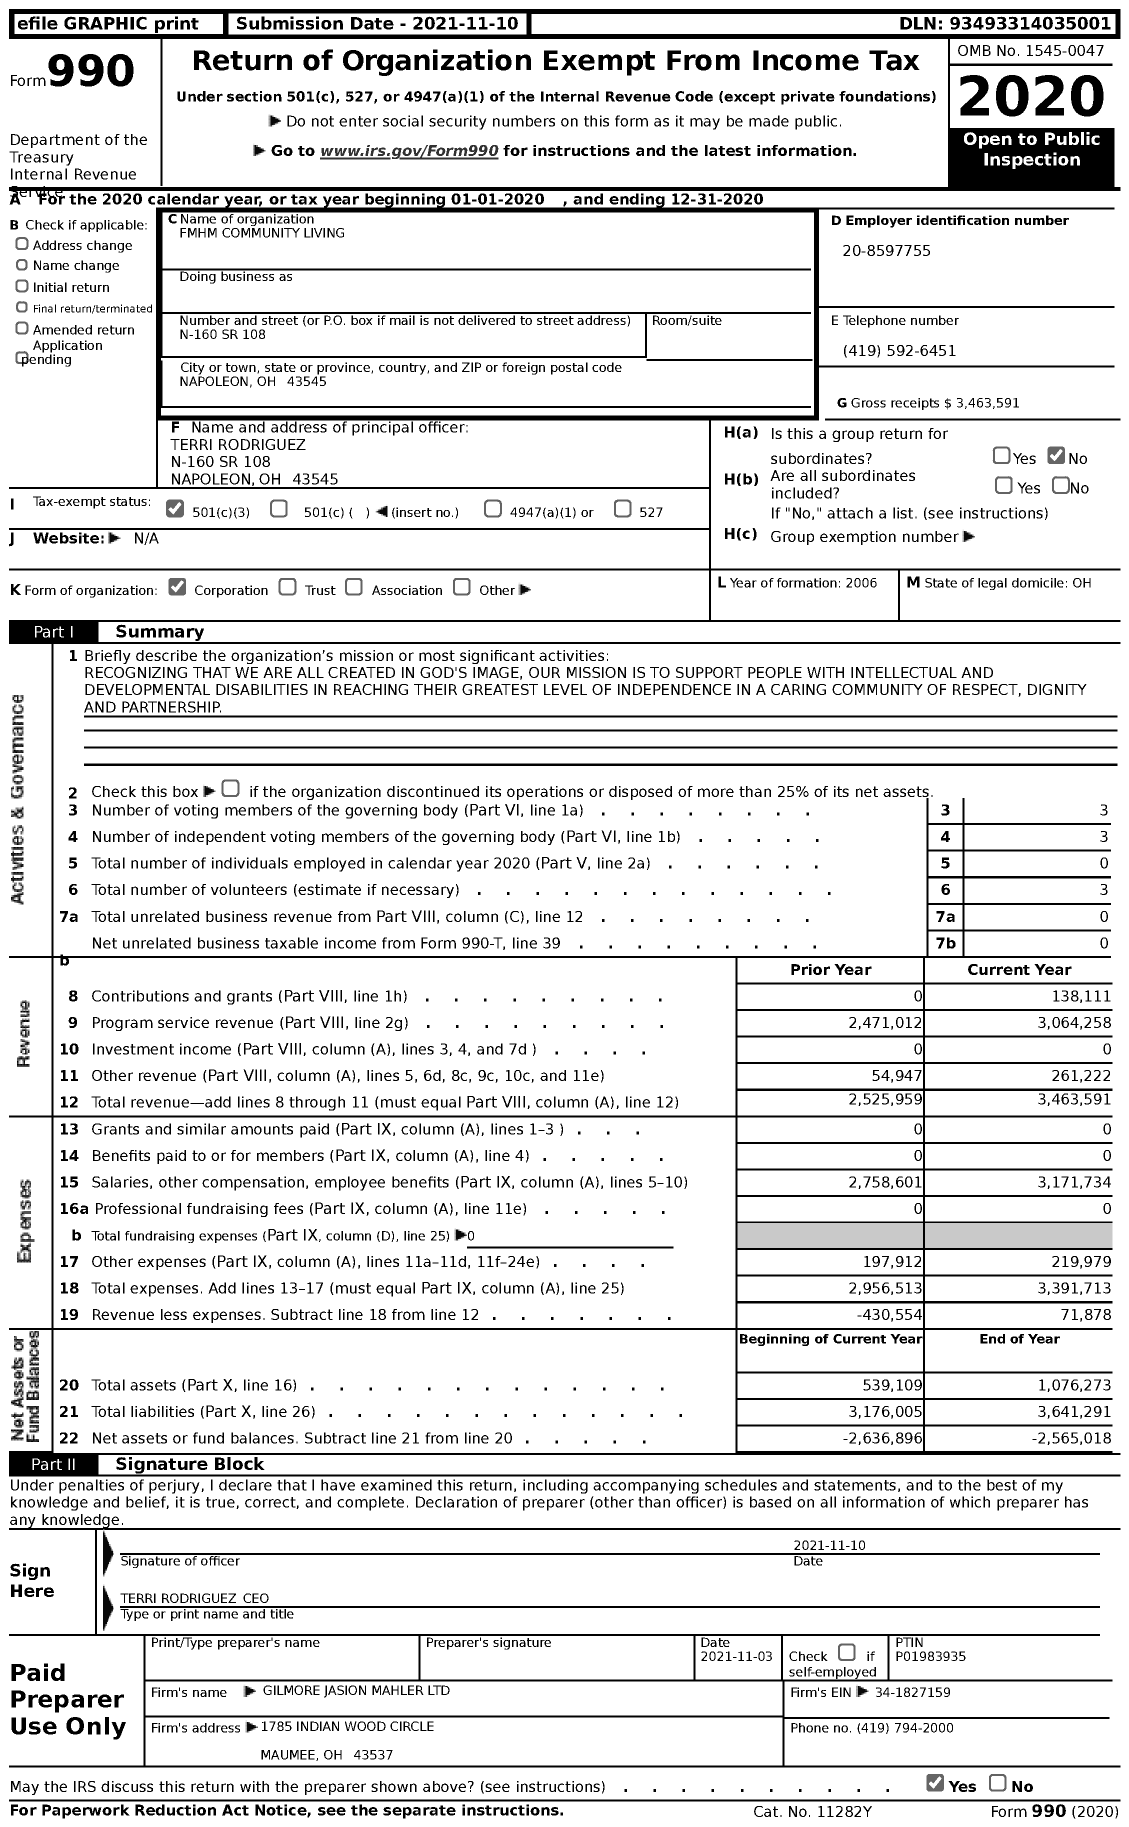 Image of first page of 2020 Form 990 for FMHM Community Living